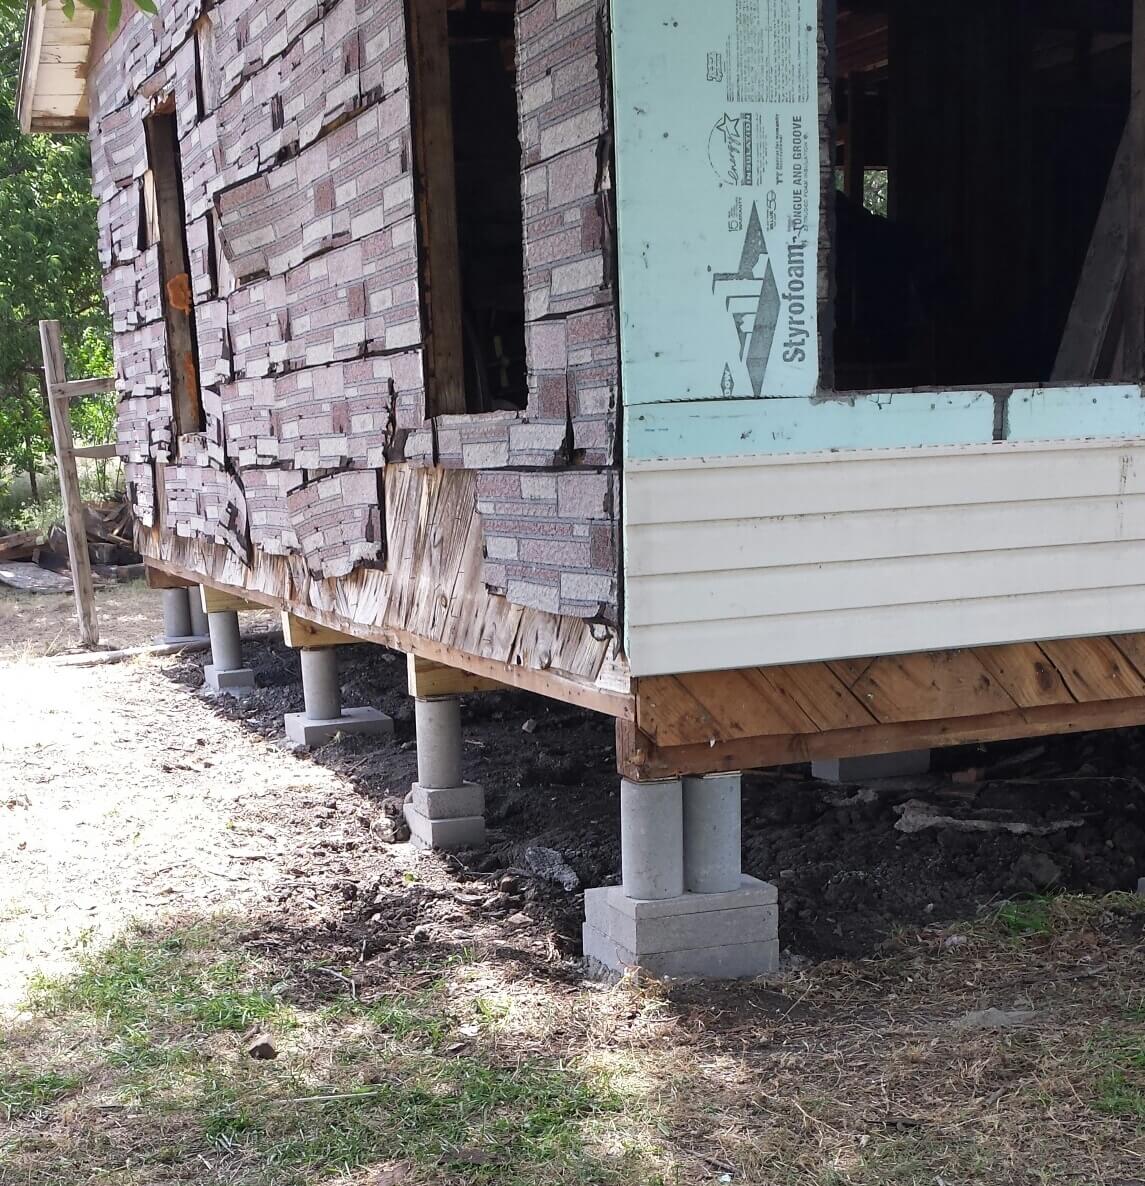 Pier and beam foundation repair costs Dallas, Fort Worth TX